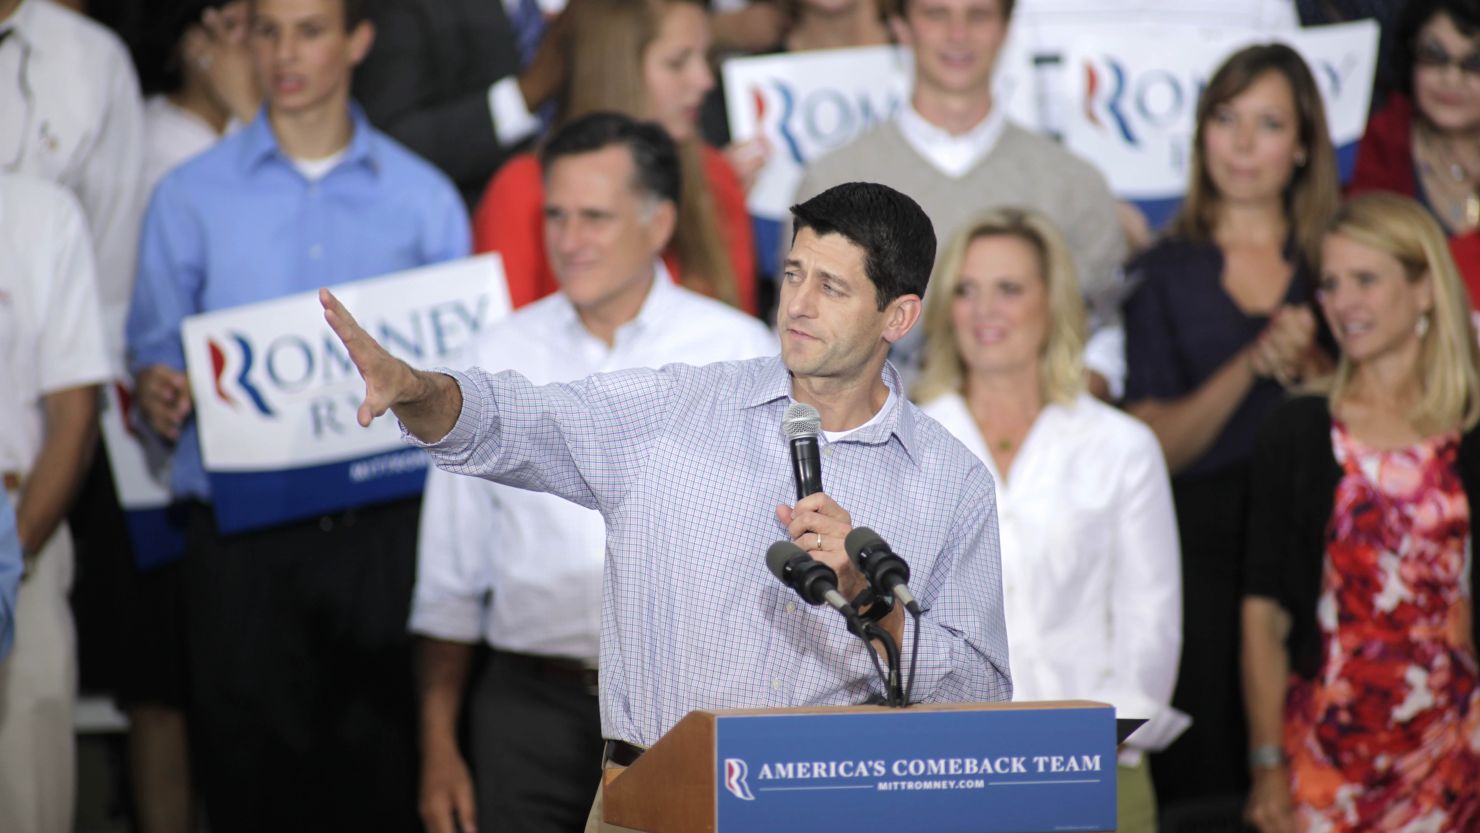 Republican vice presidential candidate Rep. Paul Ryan speaks during a campaign event on Sunday in Waukesha, Wisconsin.